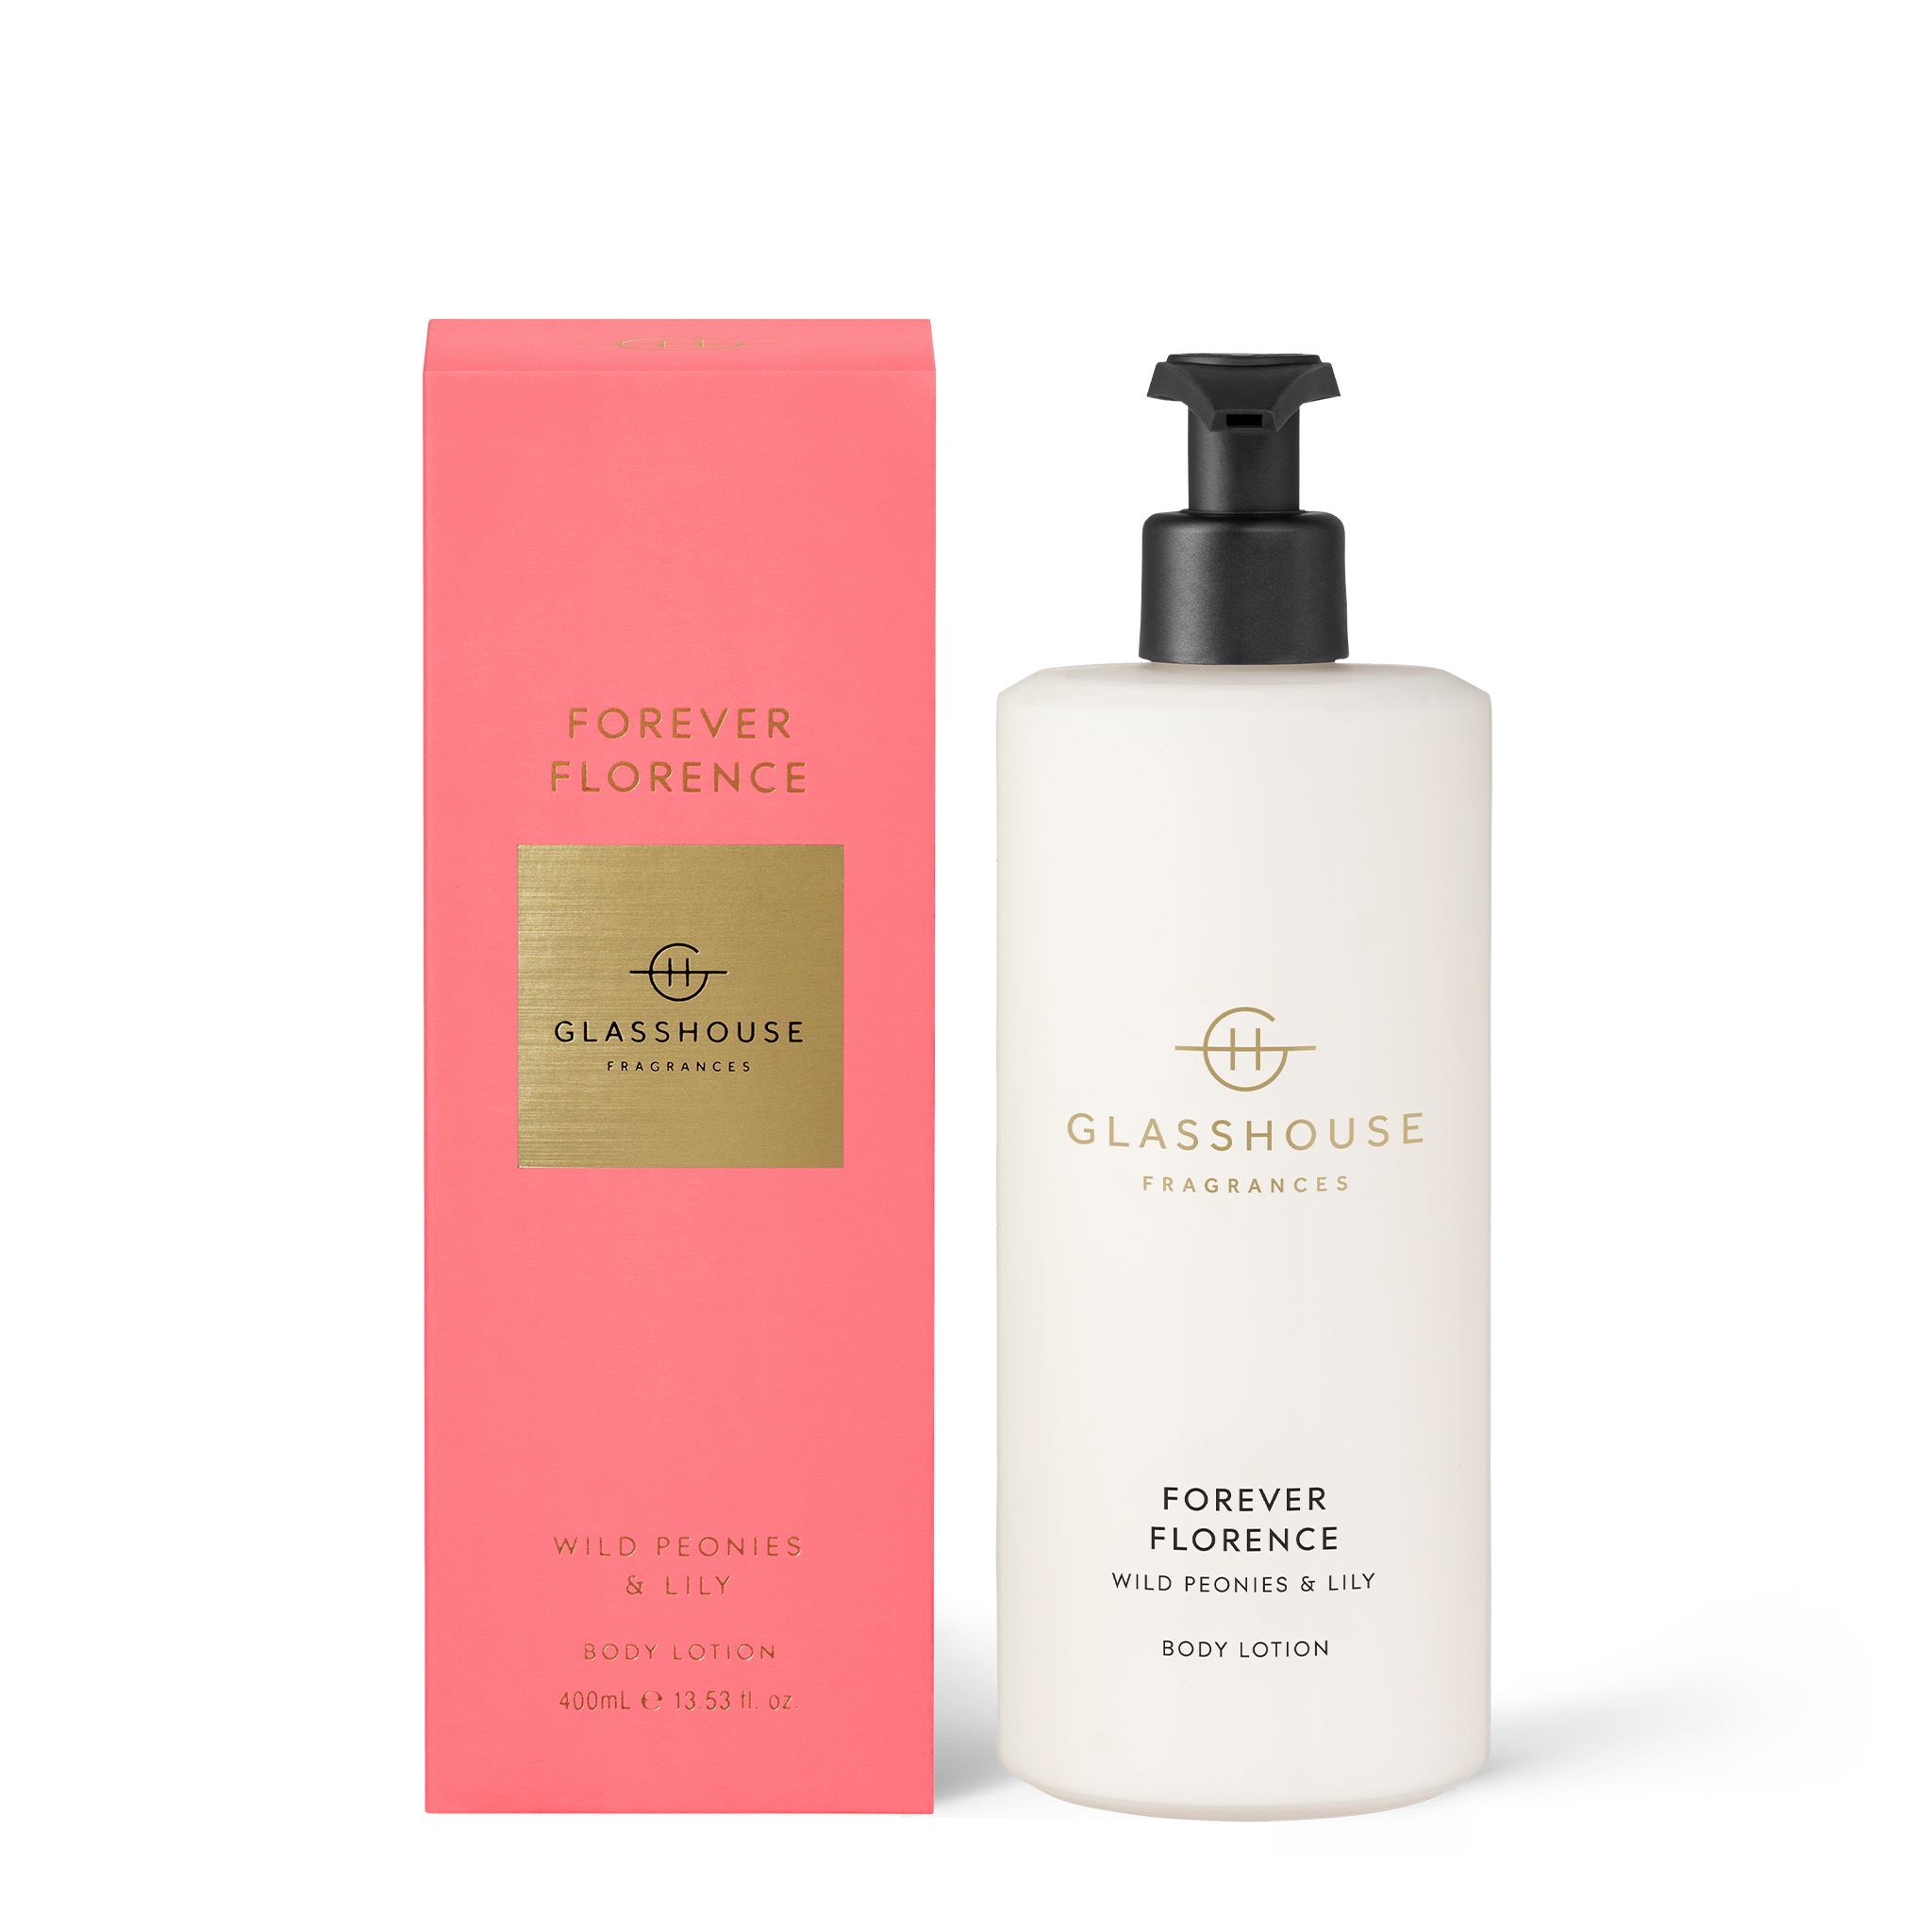 Forever Florence Body Lotion